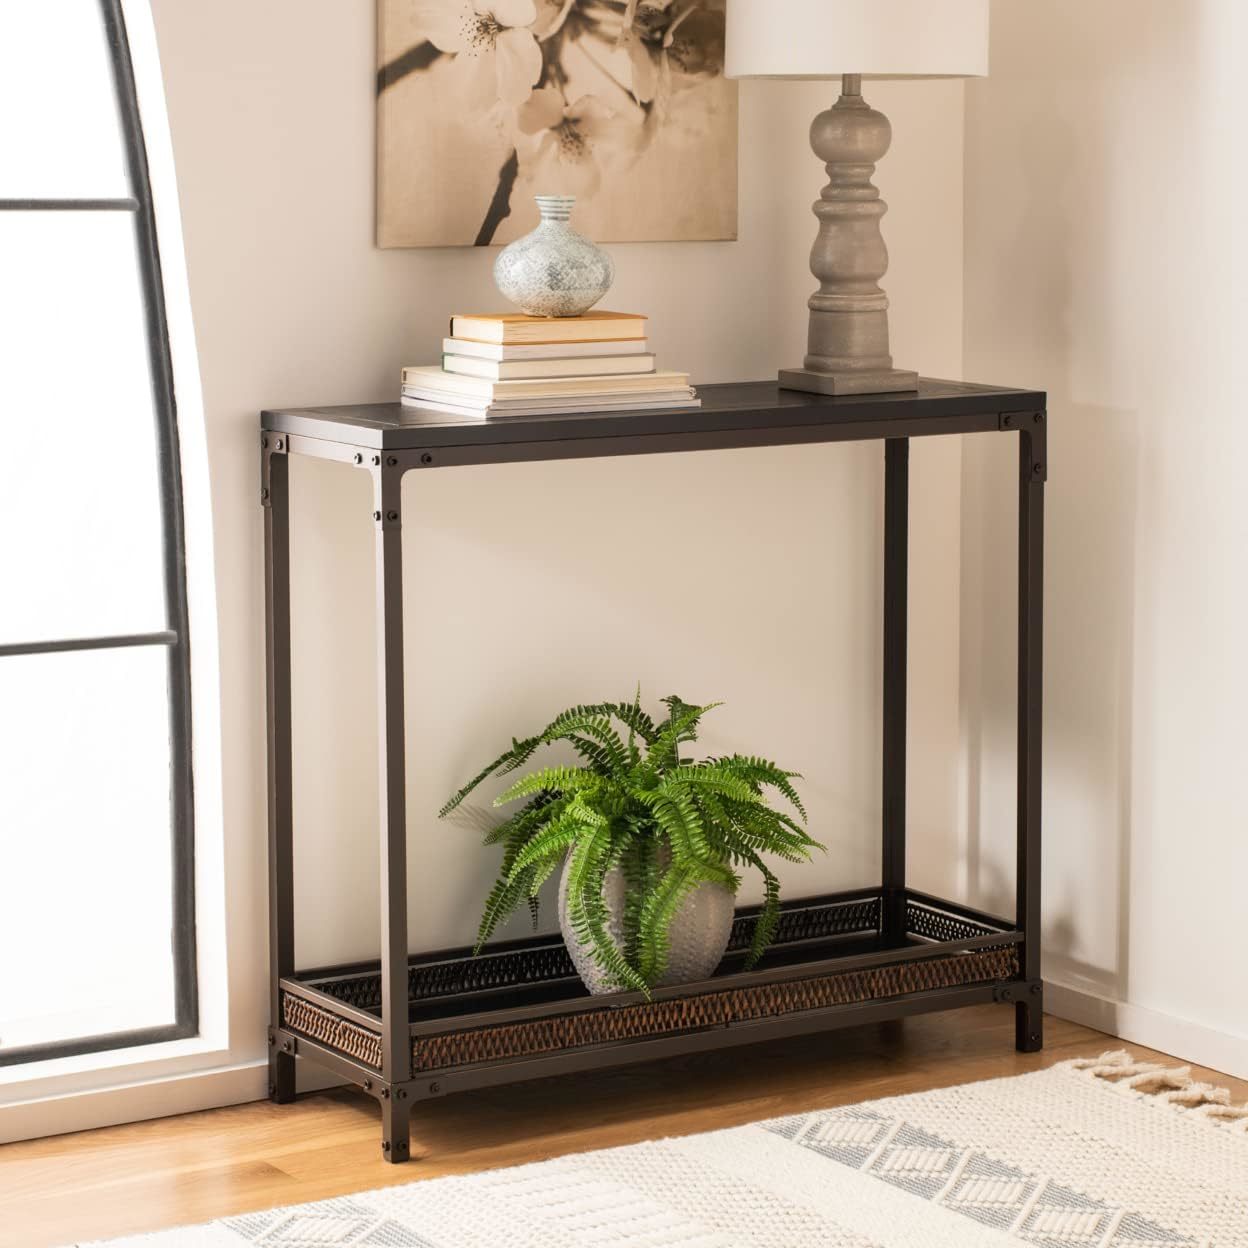 Primary image for Dinesh Console Table In Black And Dark Walnut From The Safavieh American Homes